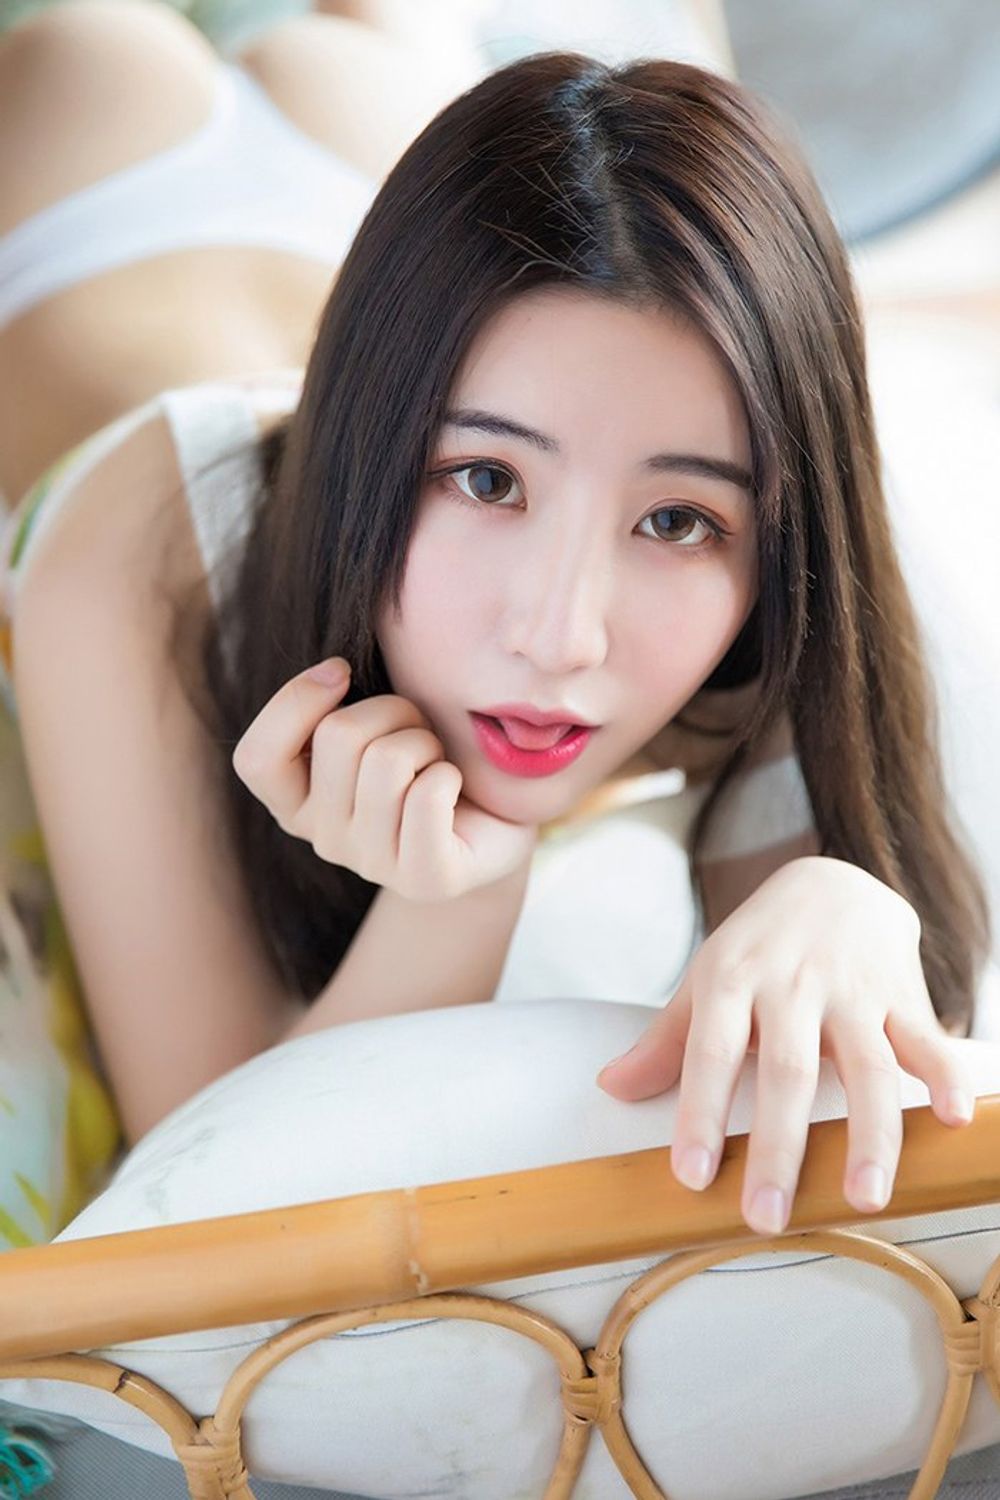 The beauty next door, Feiyue Ying, holding her breasts makes people obsessed